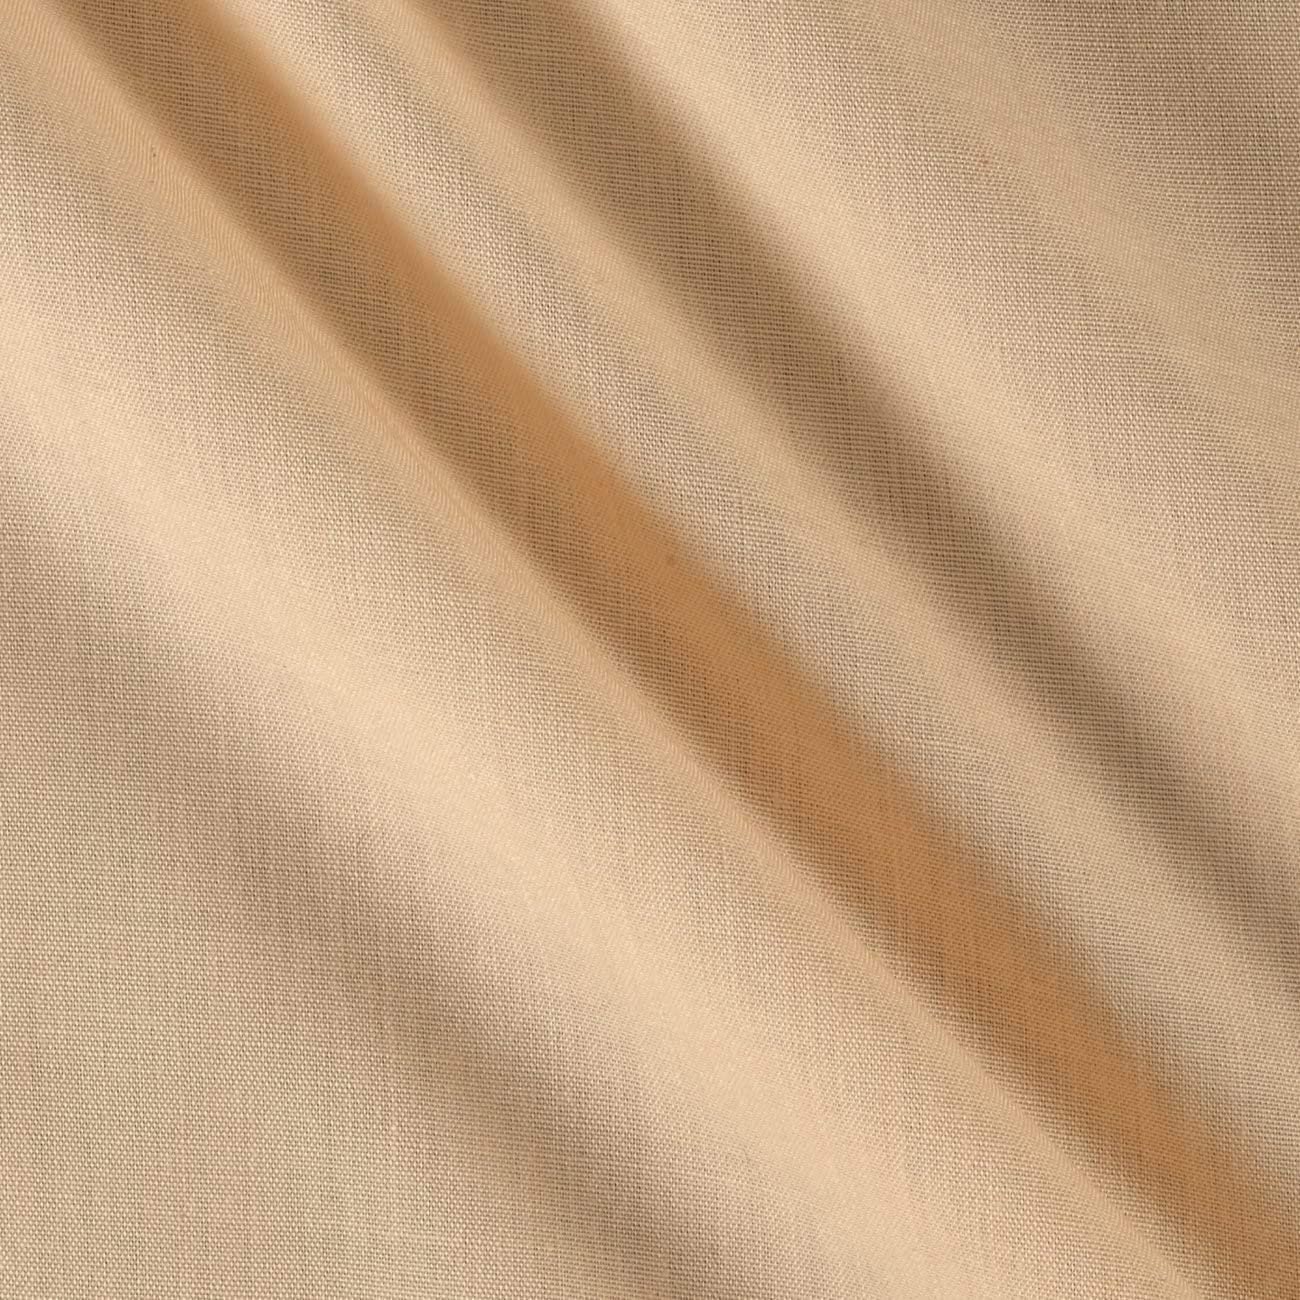 Hunter Green 60” Wide Premium Cotton Blend Broadcloth Fabric By the Yard :  Arts, Crafts & Sewing 